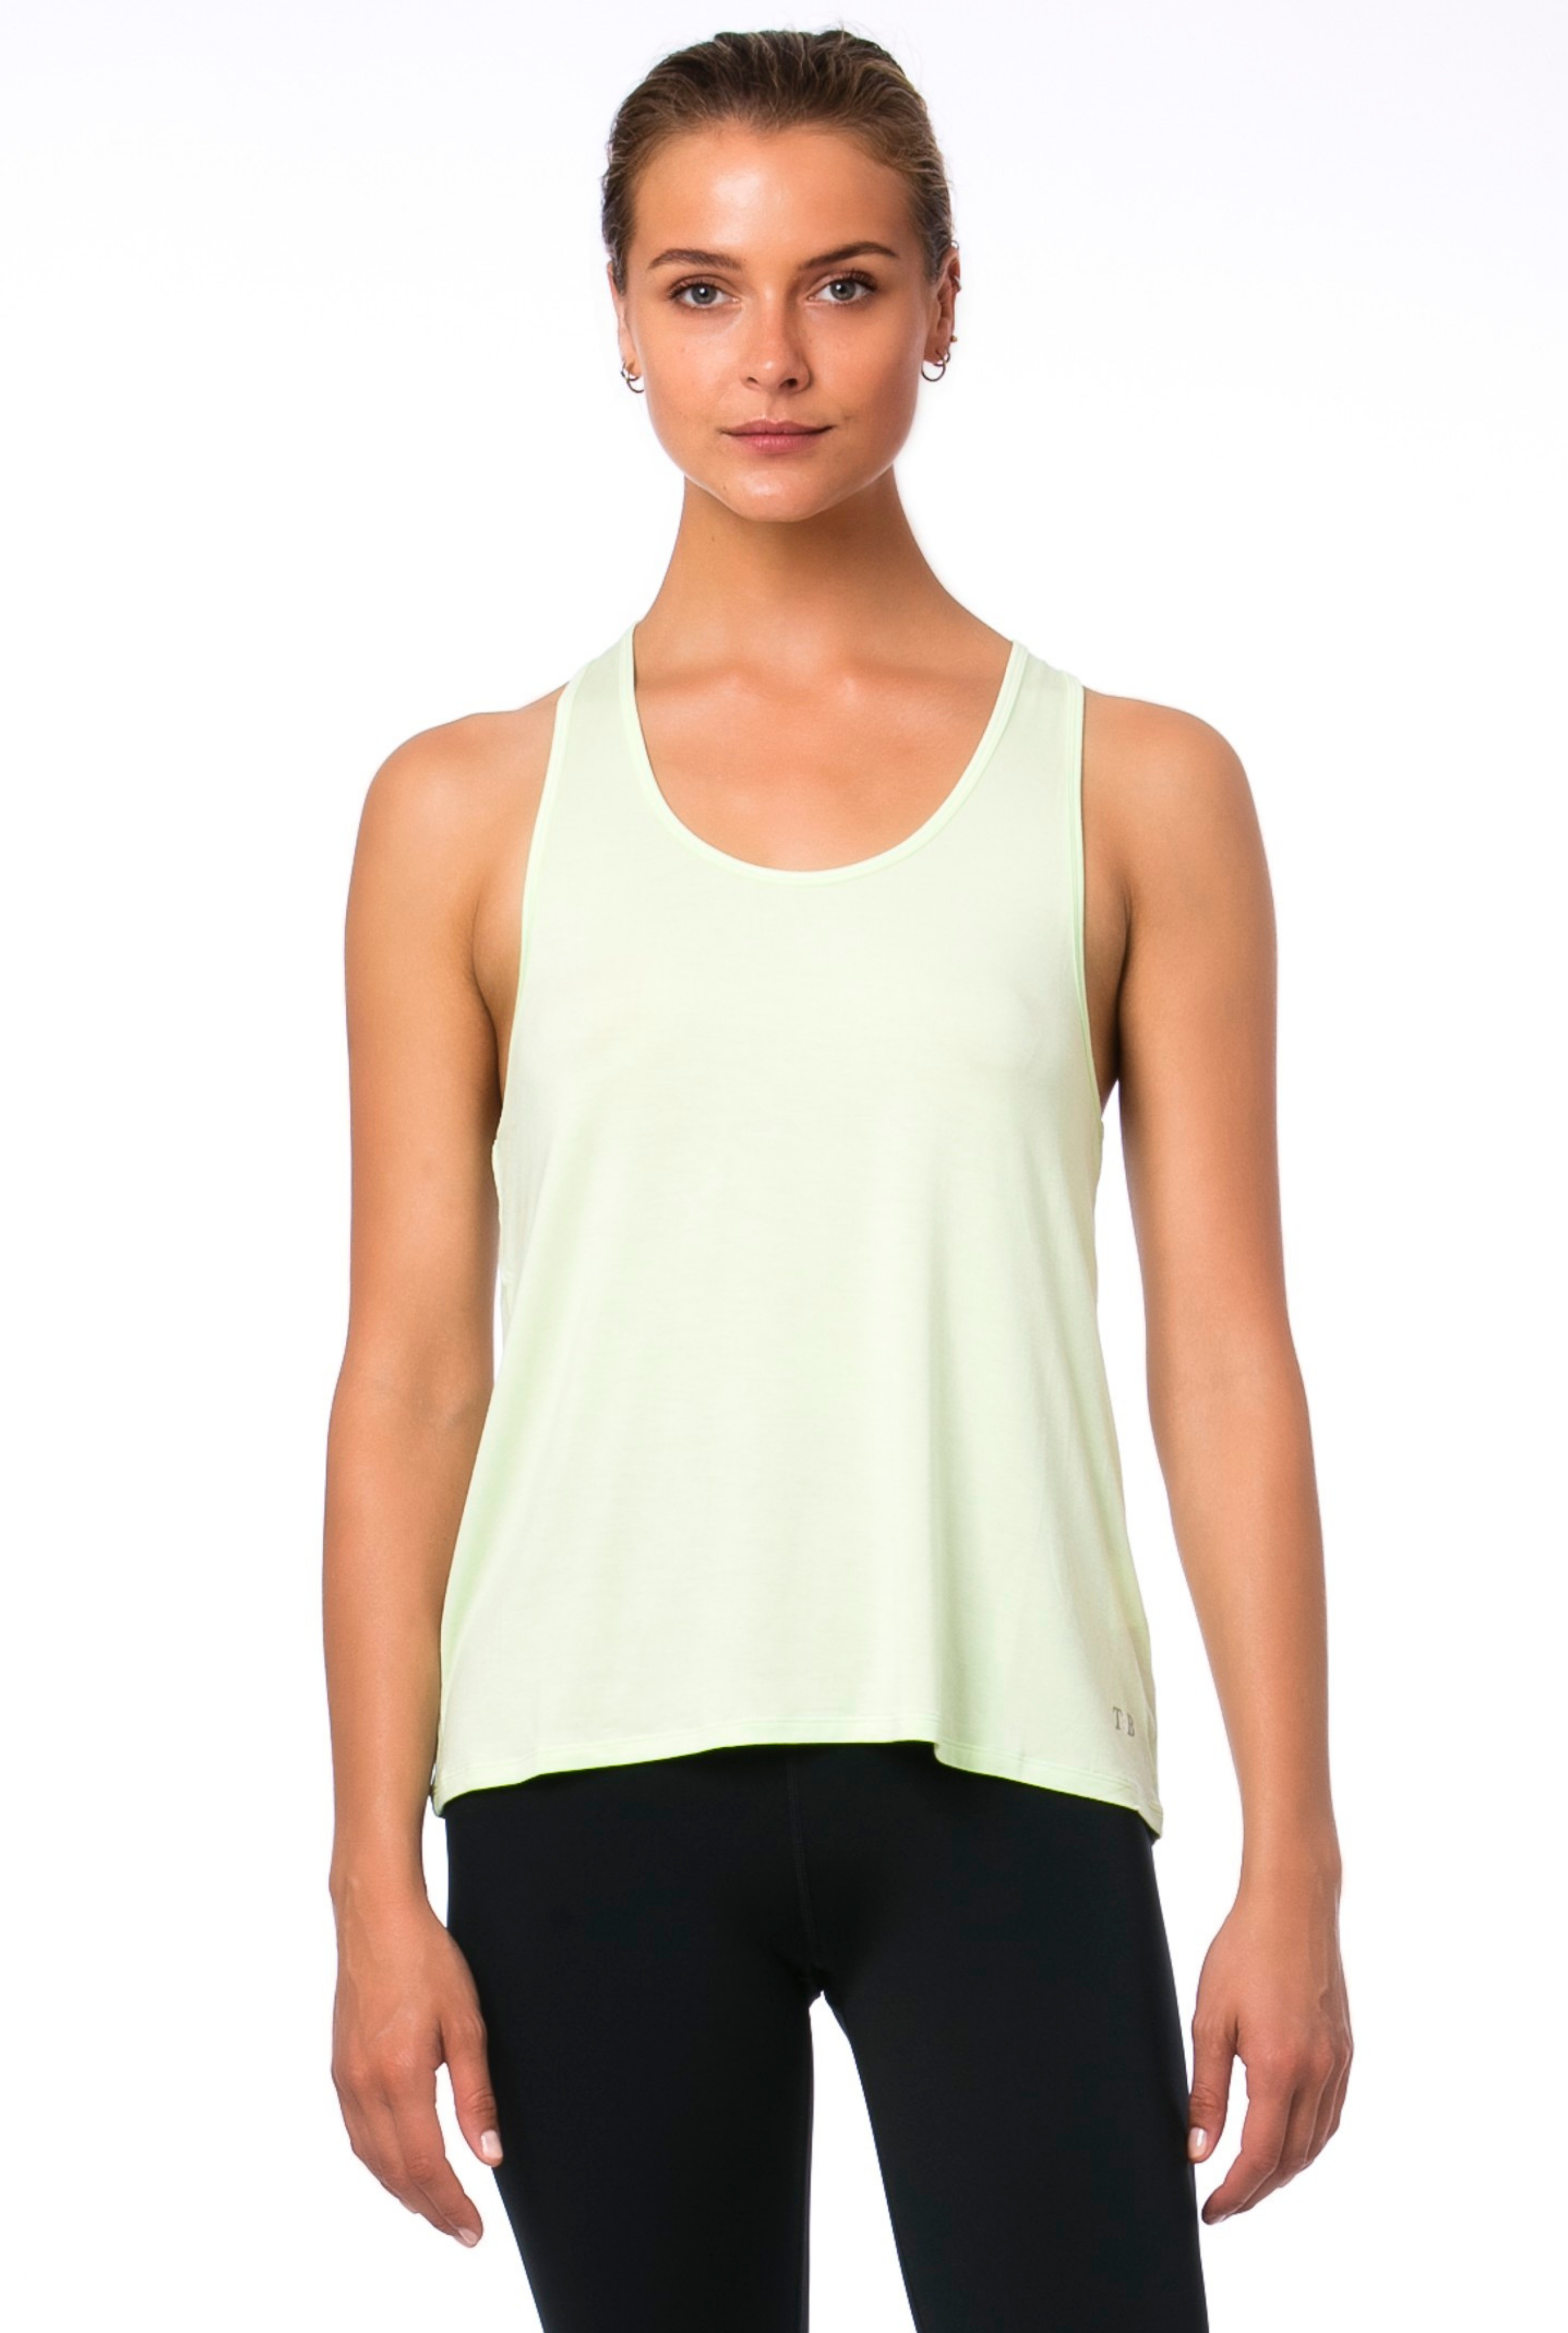 Trendy & Bendy Ashtanga Tank in lime green has a flattering round neckline and is designed to compliment your waistline. It is a long length tank with a racer back, made with modal fabric and is a super soft, buttery fabric. It is lightweight, breathable, stylish and versatile.